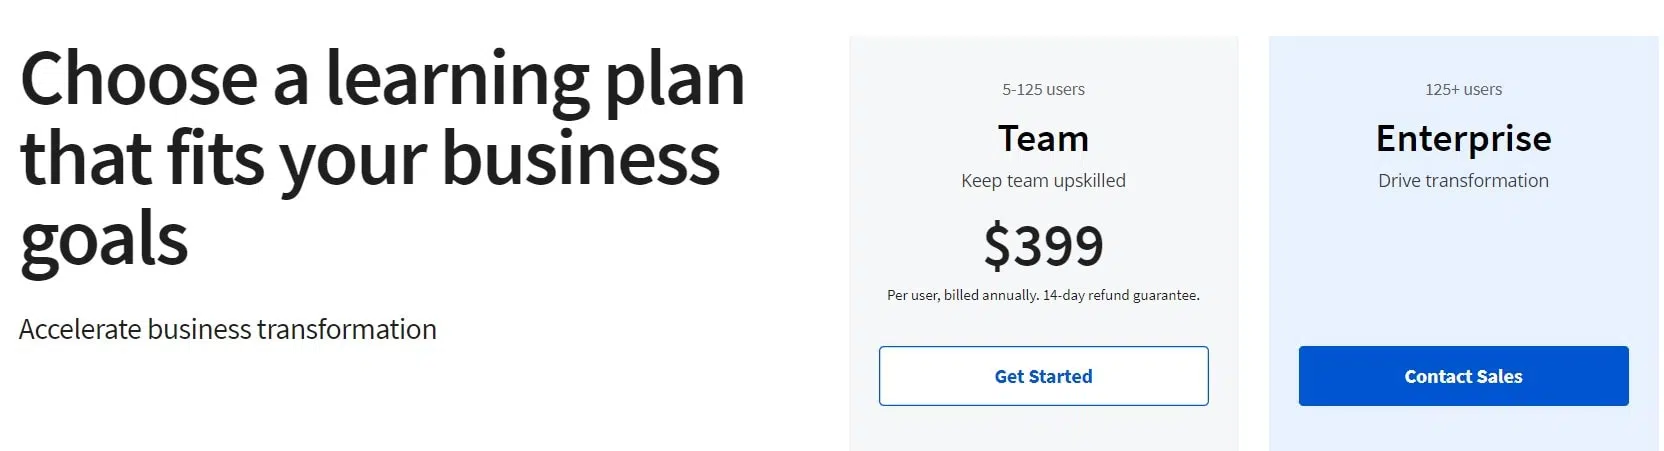 Coursera pricing plans